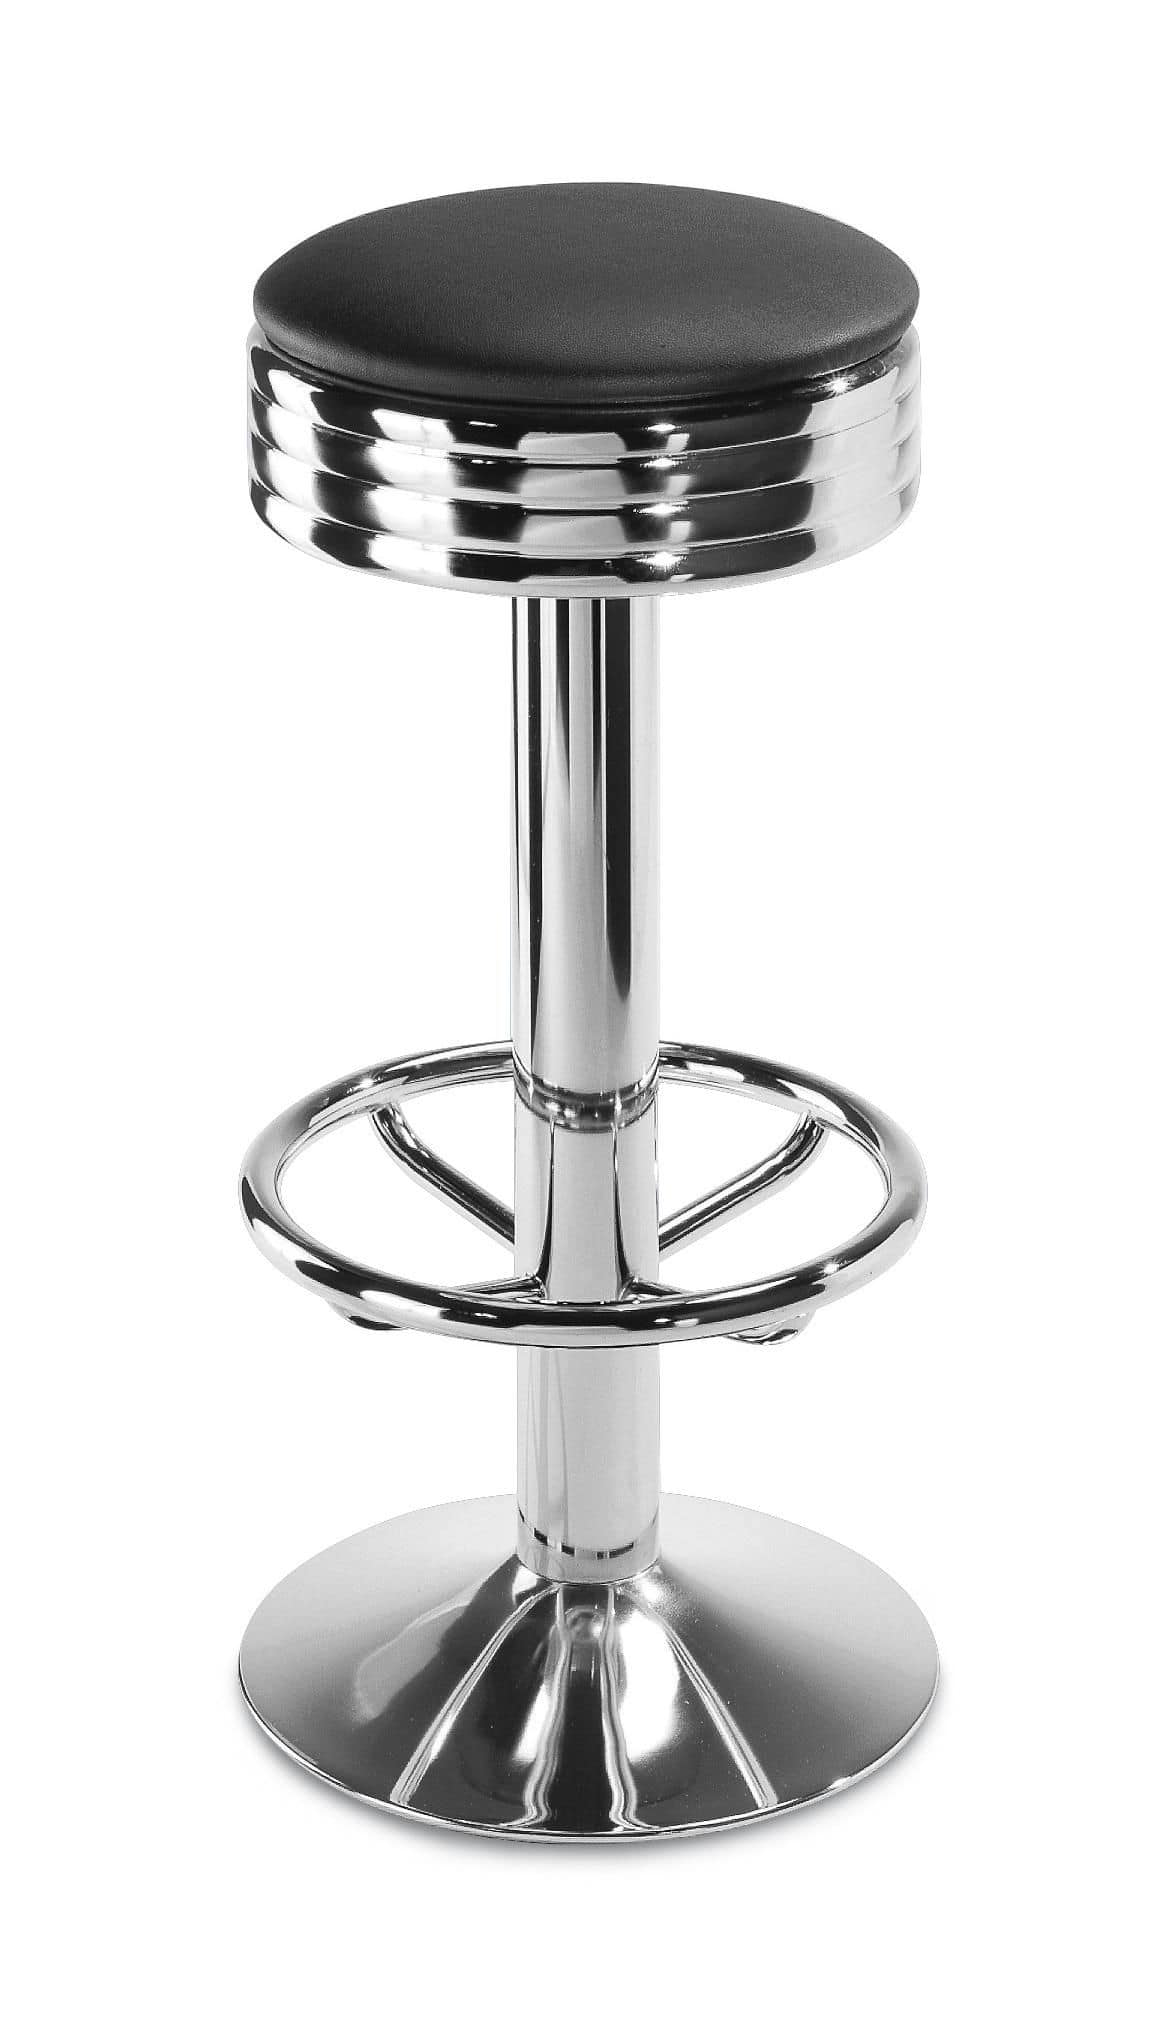 Art.101, Barstool with steel base, round upholstered seat, for bar and home